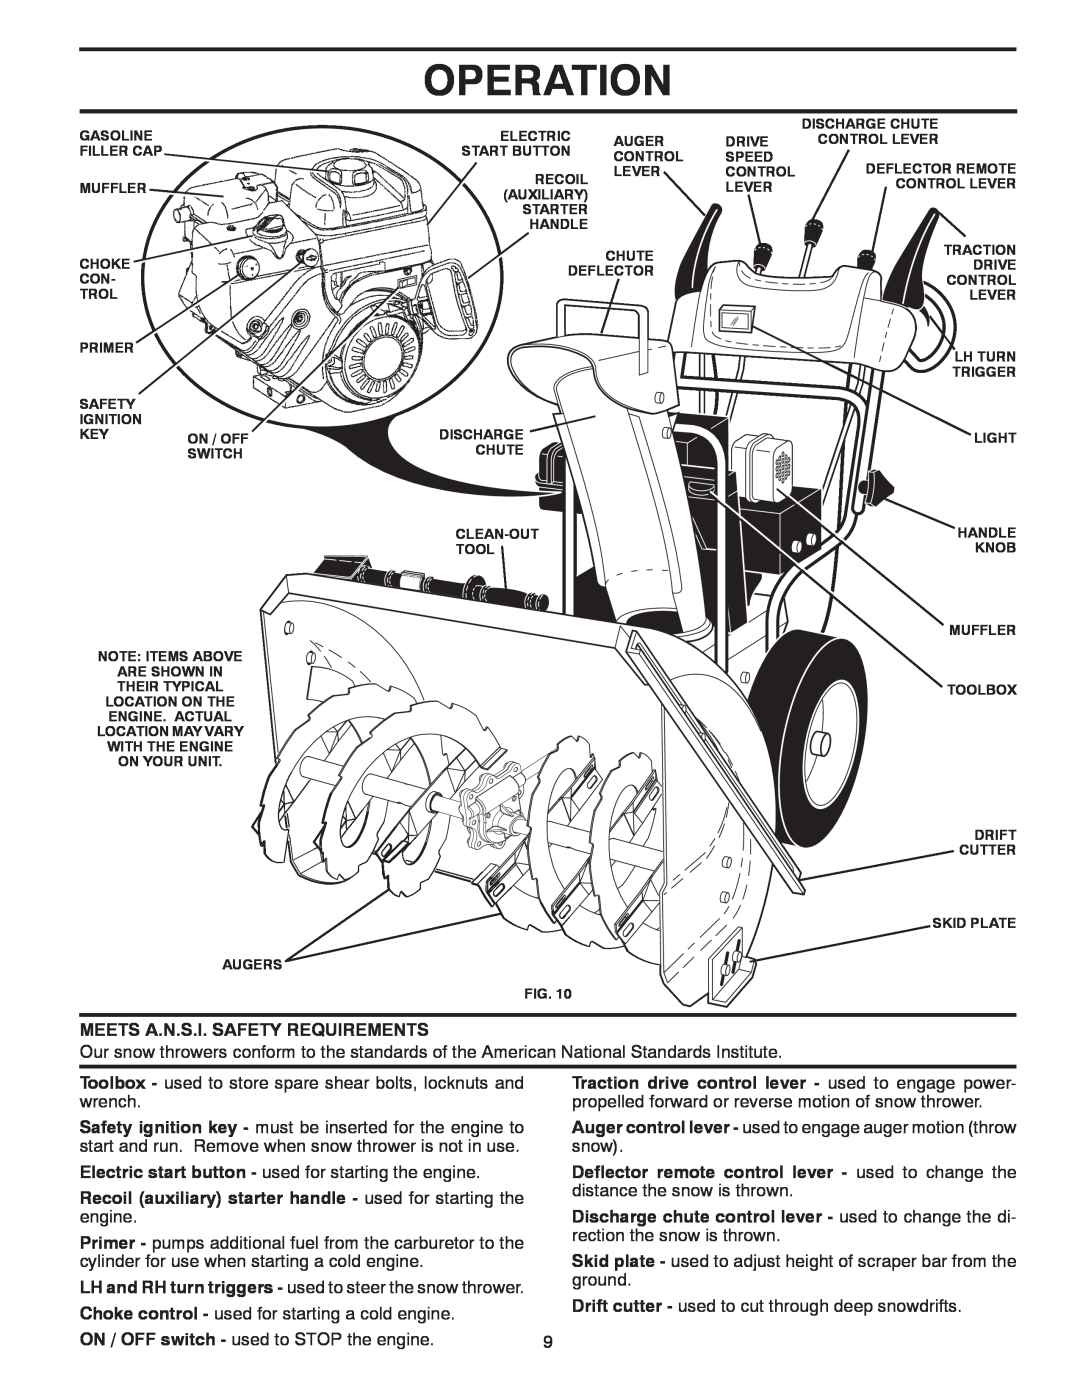 Poulan PP1150E30 owner manual Operation, Meets A.N.S.I. Safety Requirements 